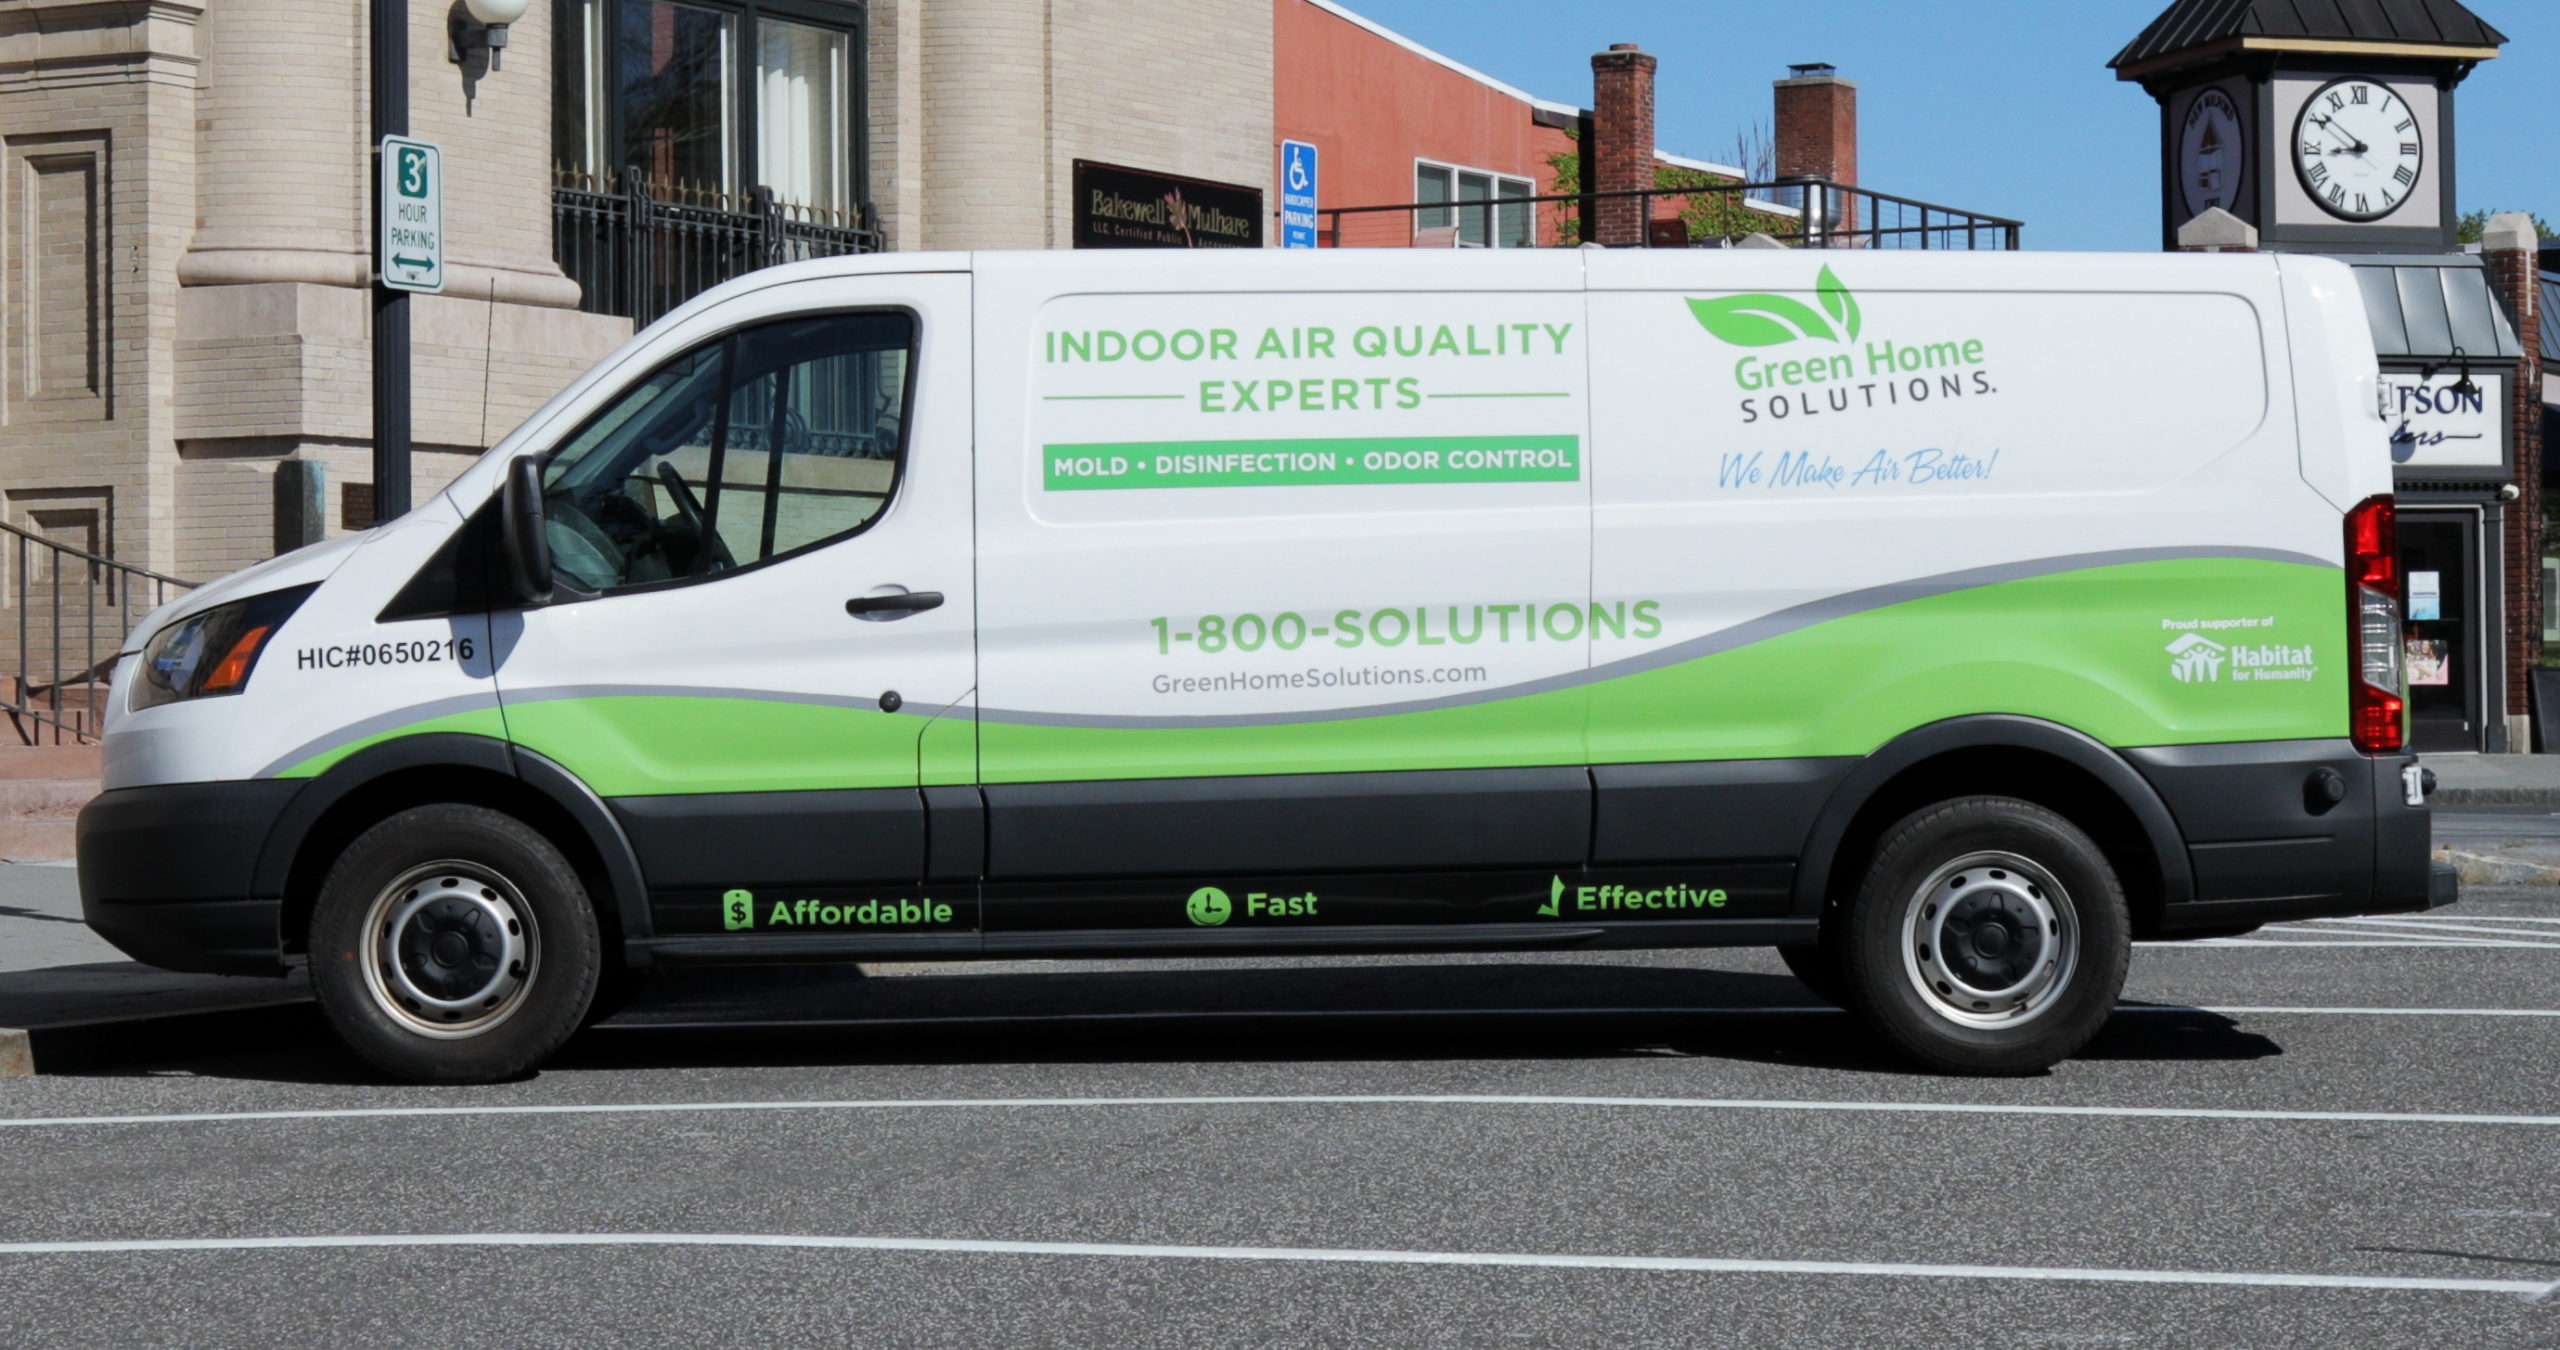 Green Home Solutions van parked on the street.